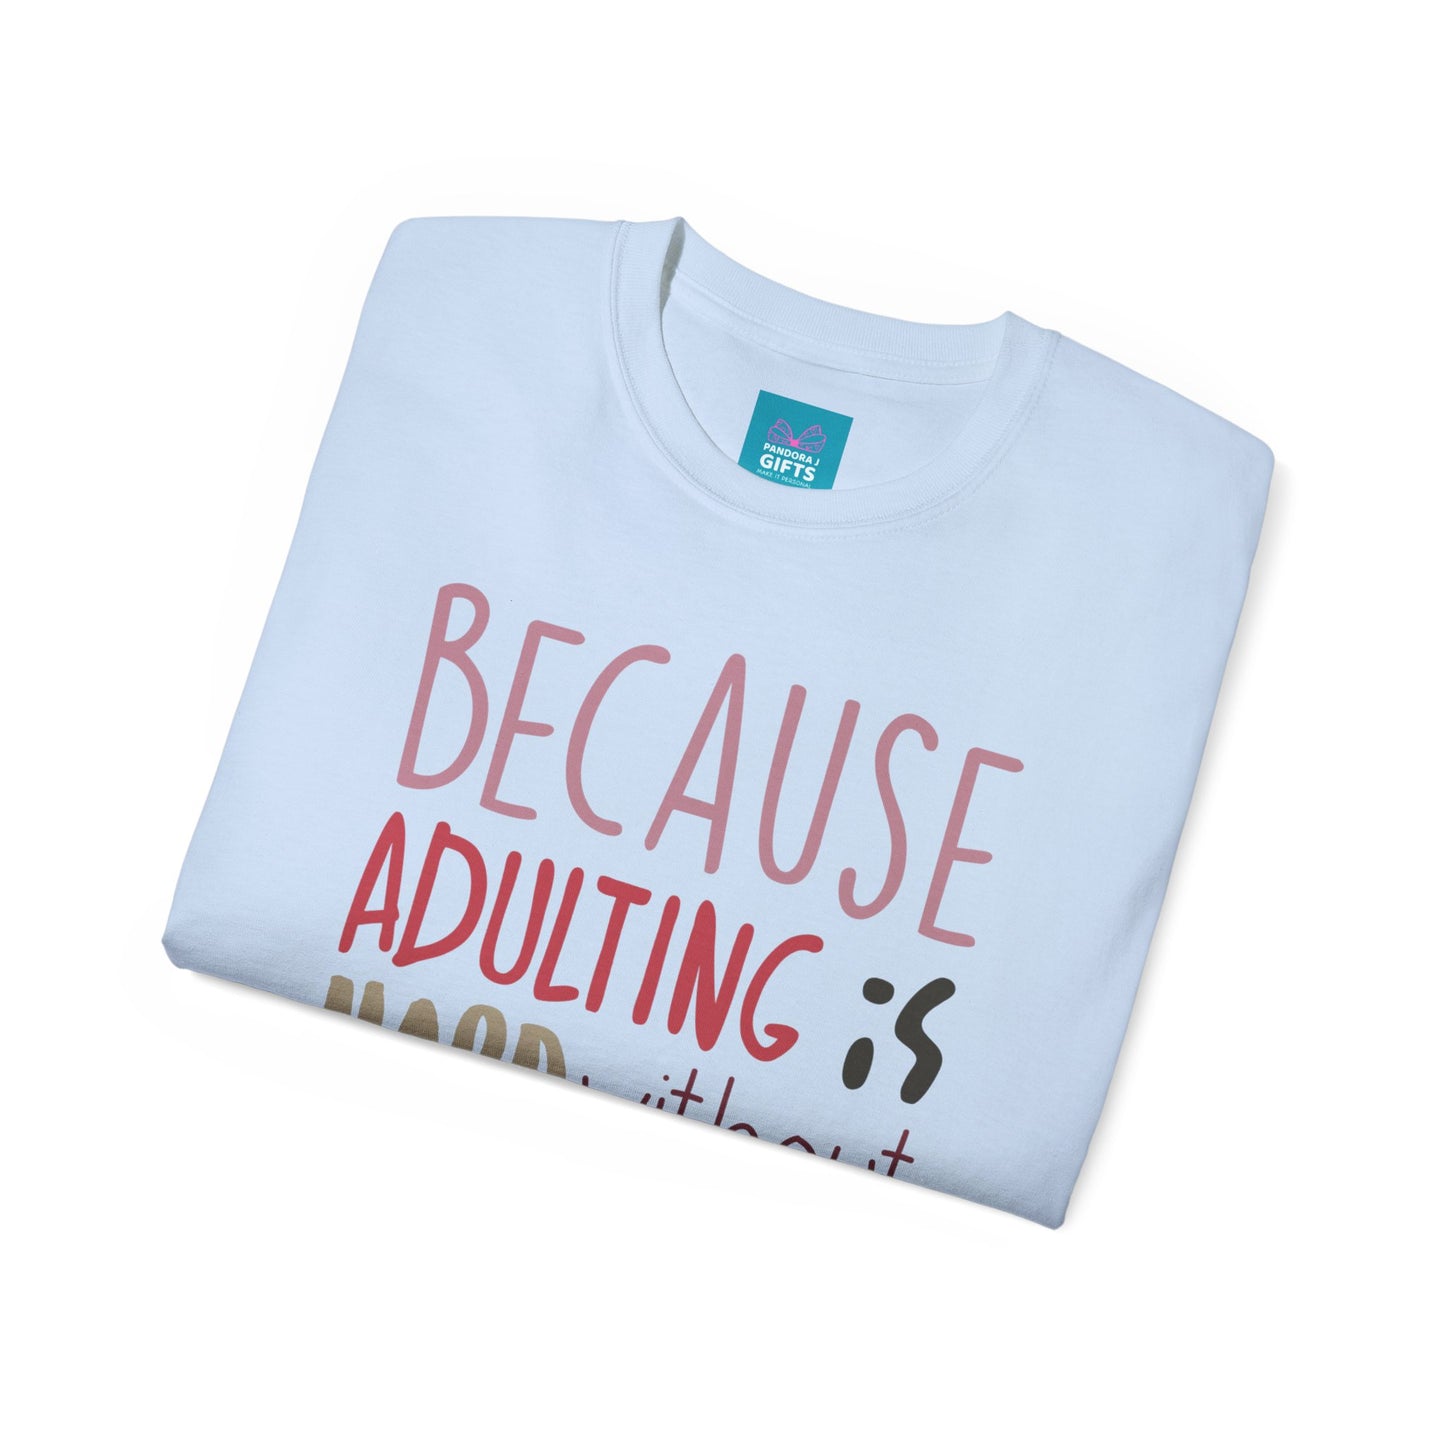 light blue shirt with words "Because Adulting is Hard without Jesus"